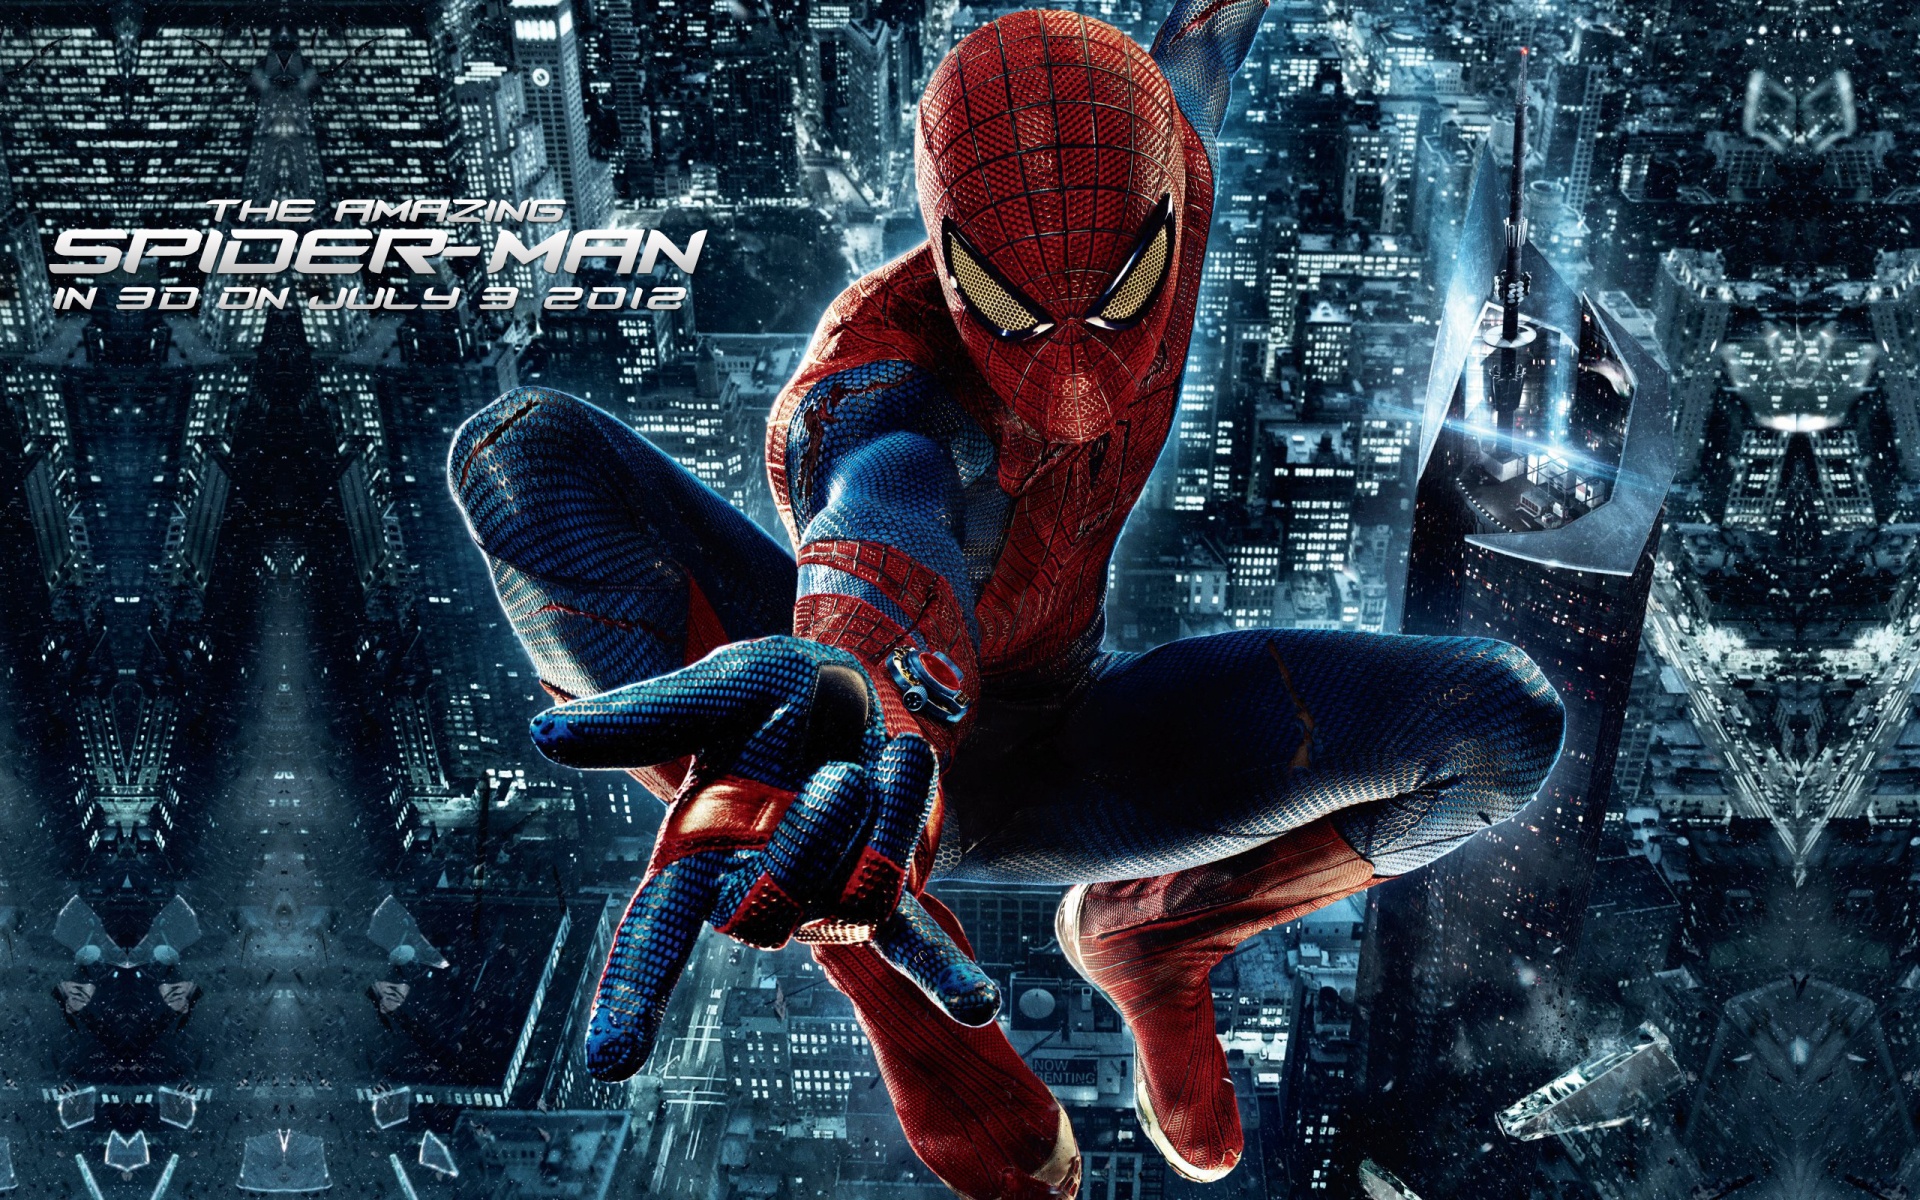 Amazing Spiderman Wallpapers for Computer 11343 - HD Wallpaper Site